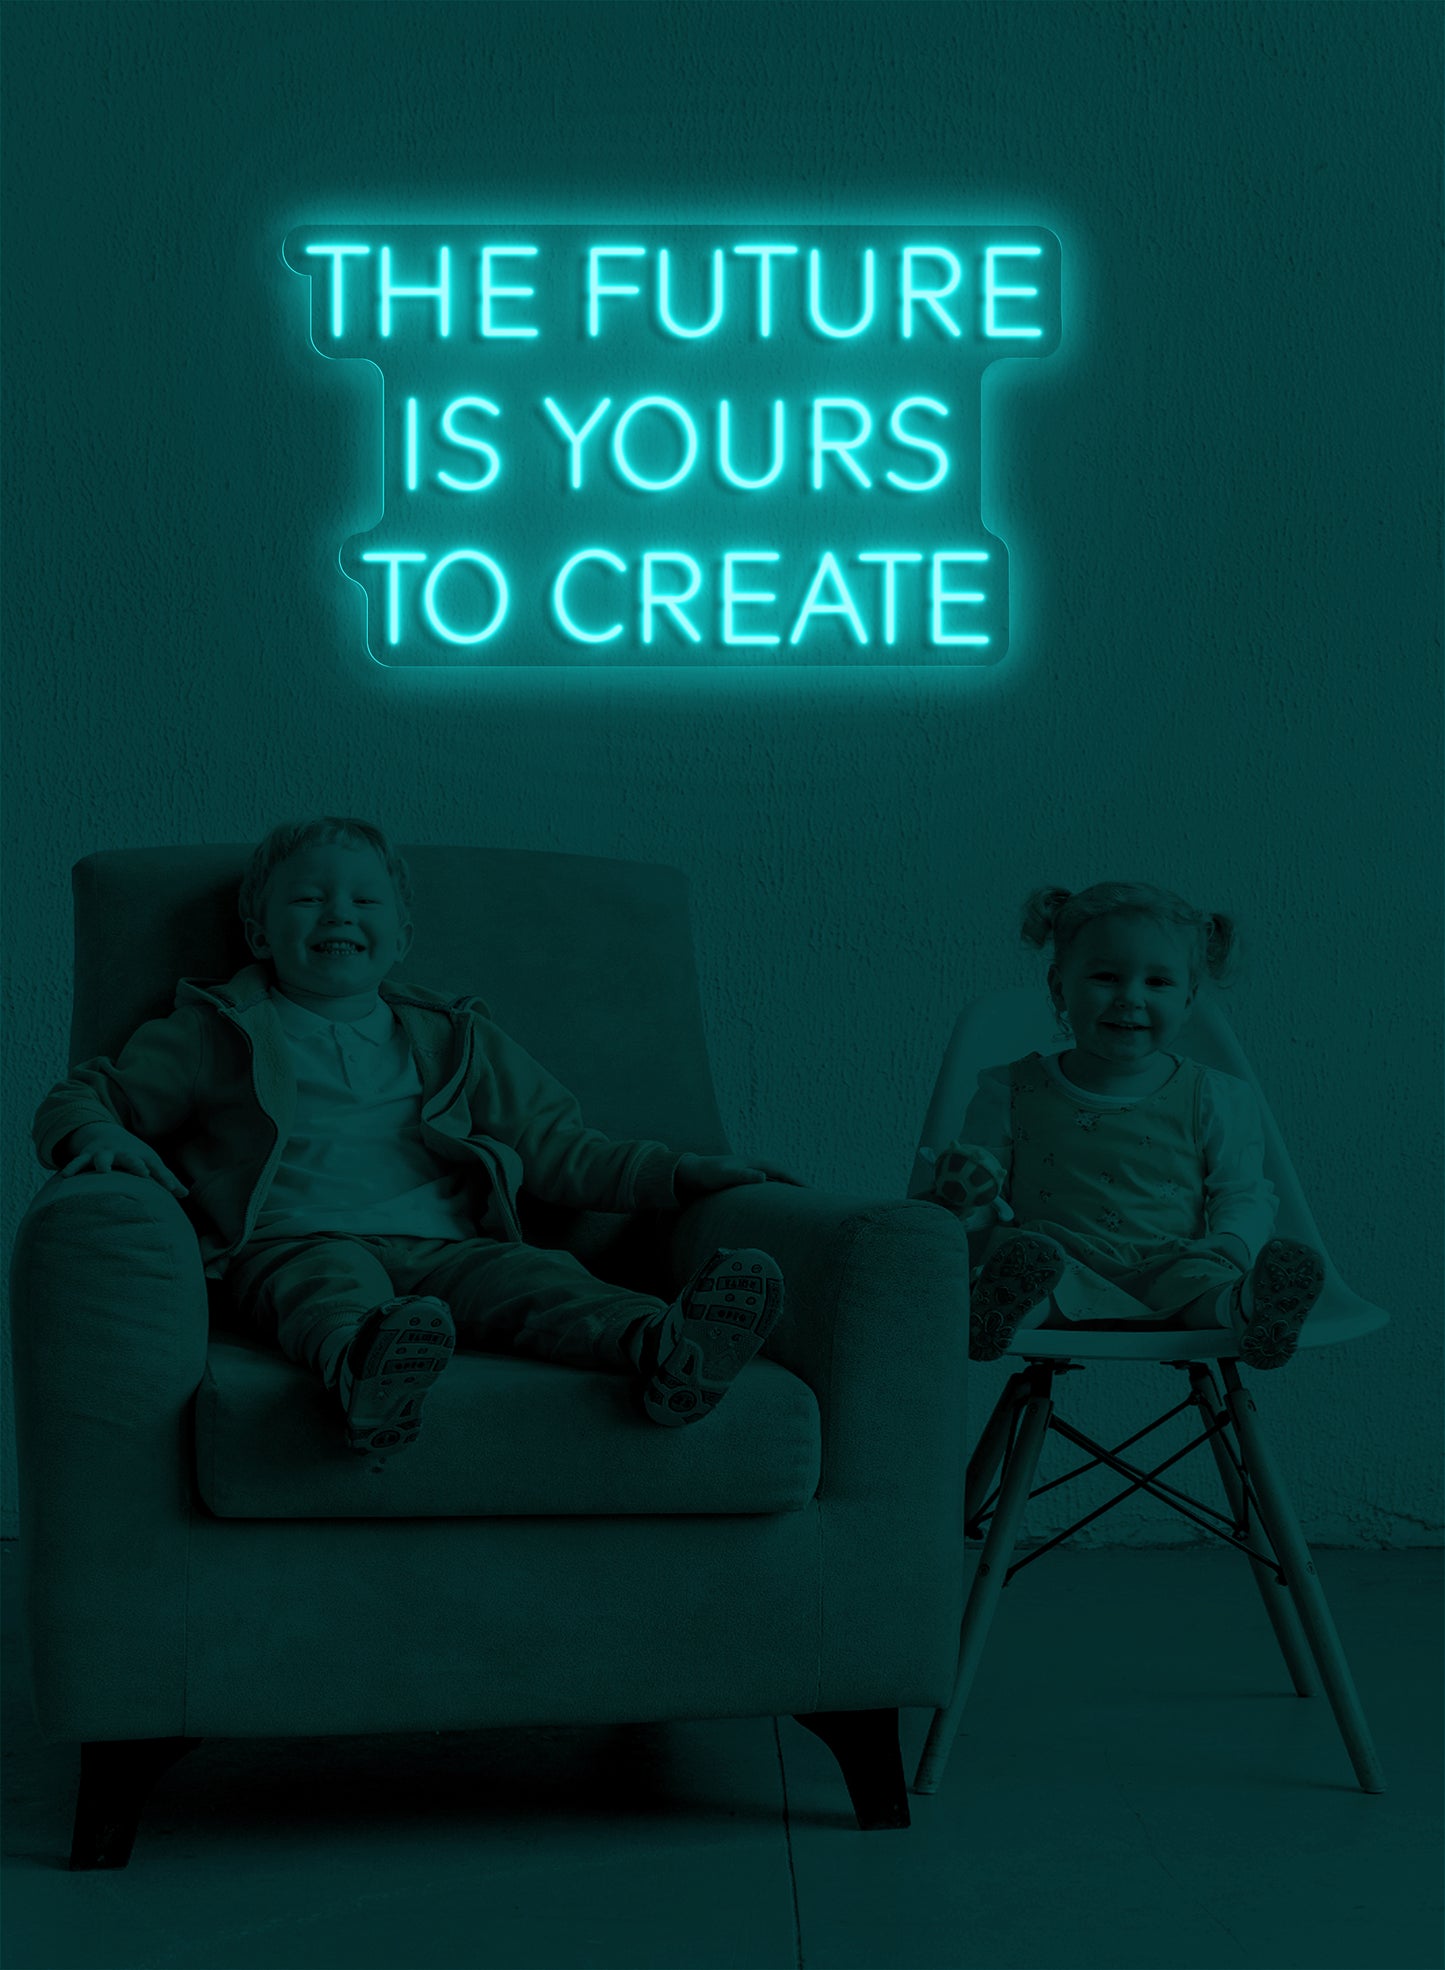 The Future is yours